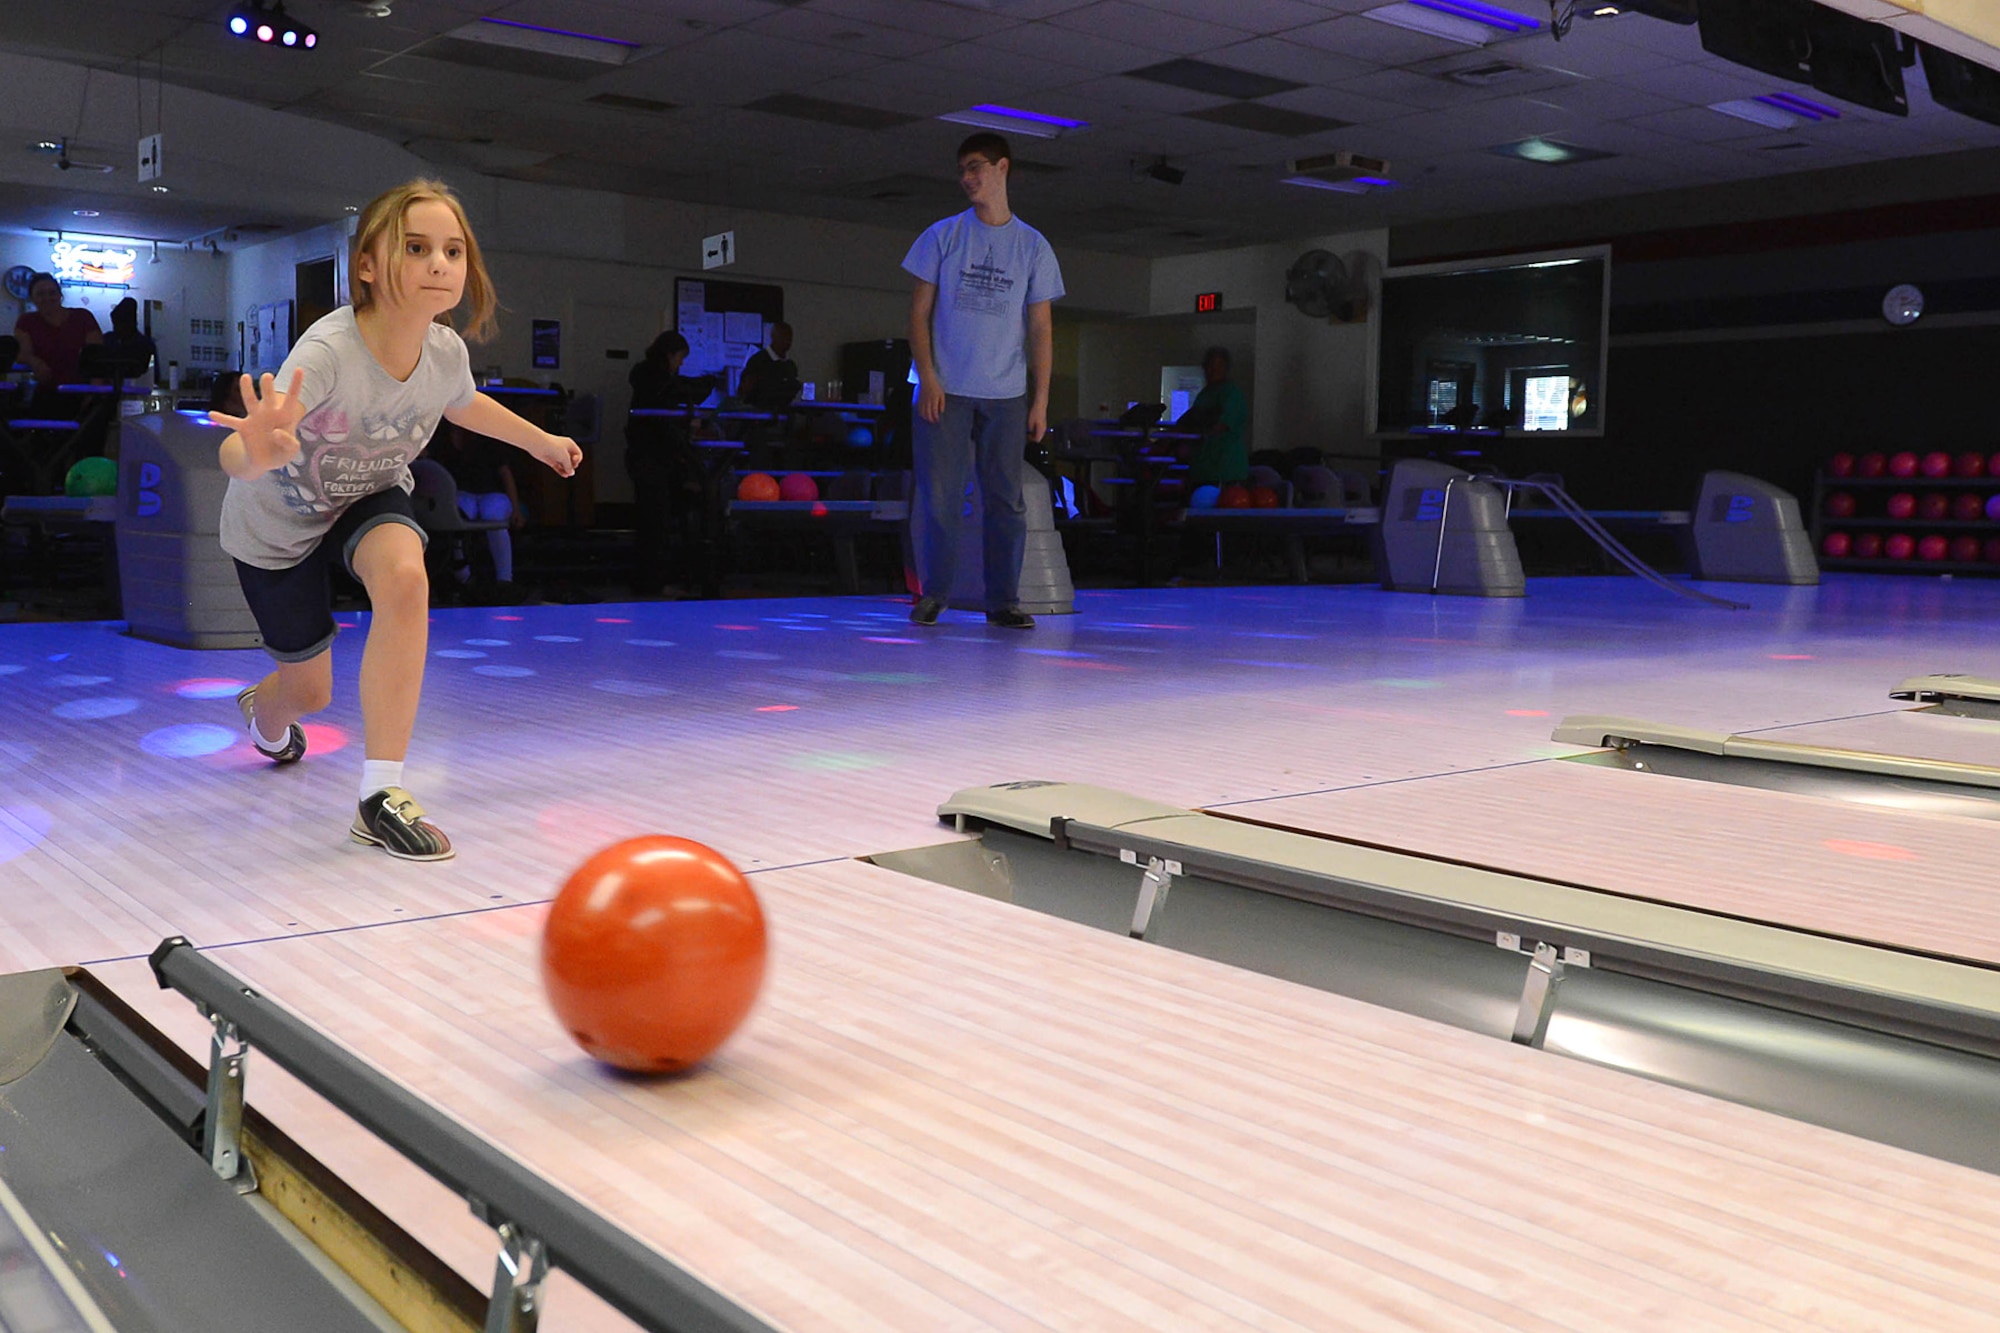 Ava Leinart bowls with her family during an event at Hanscom Lanes in 2015. This summer, children at Hanscom Air Force Base, Mass., and other Air Force installations have the opportunity to bowl for free, thanks to the Kids Bowl Free program. (U.S. Air Force photo by Jerry Saslav)